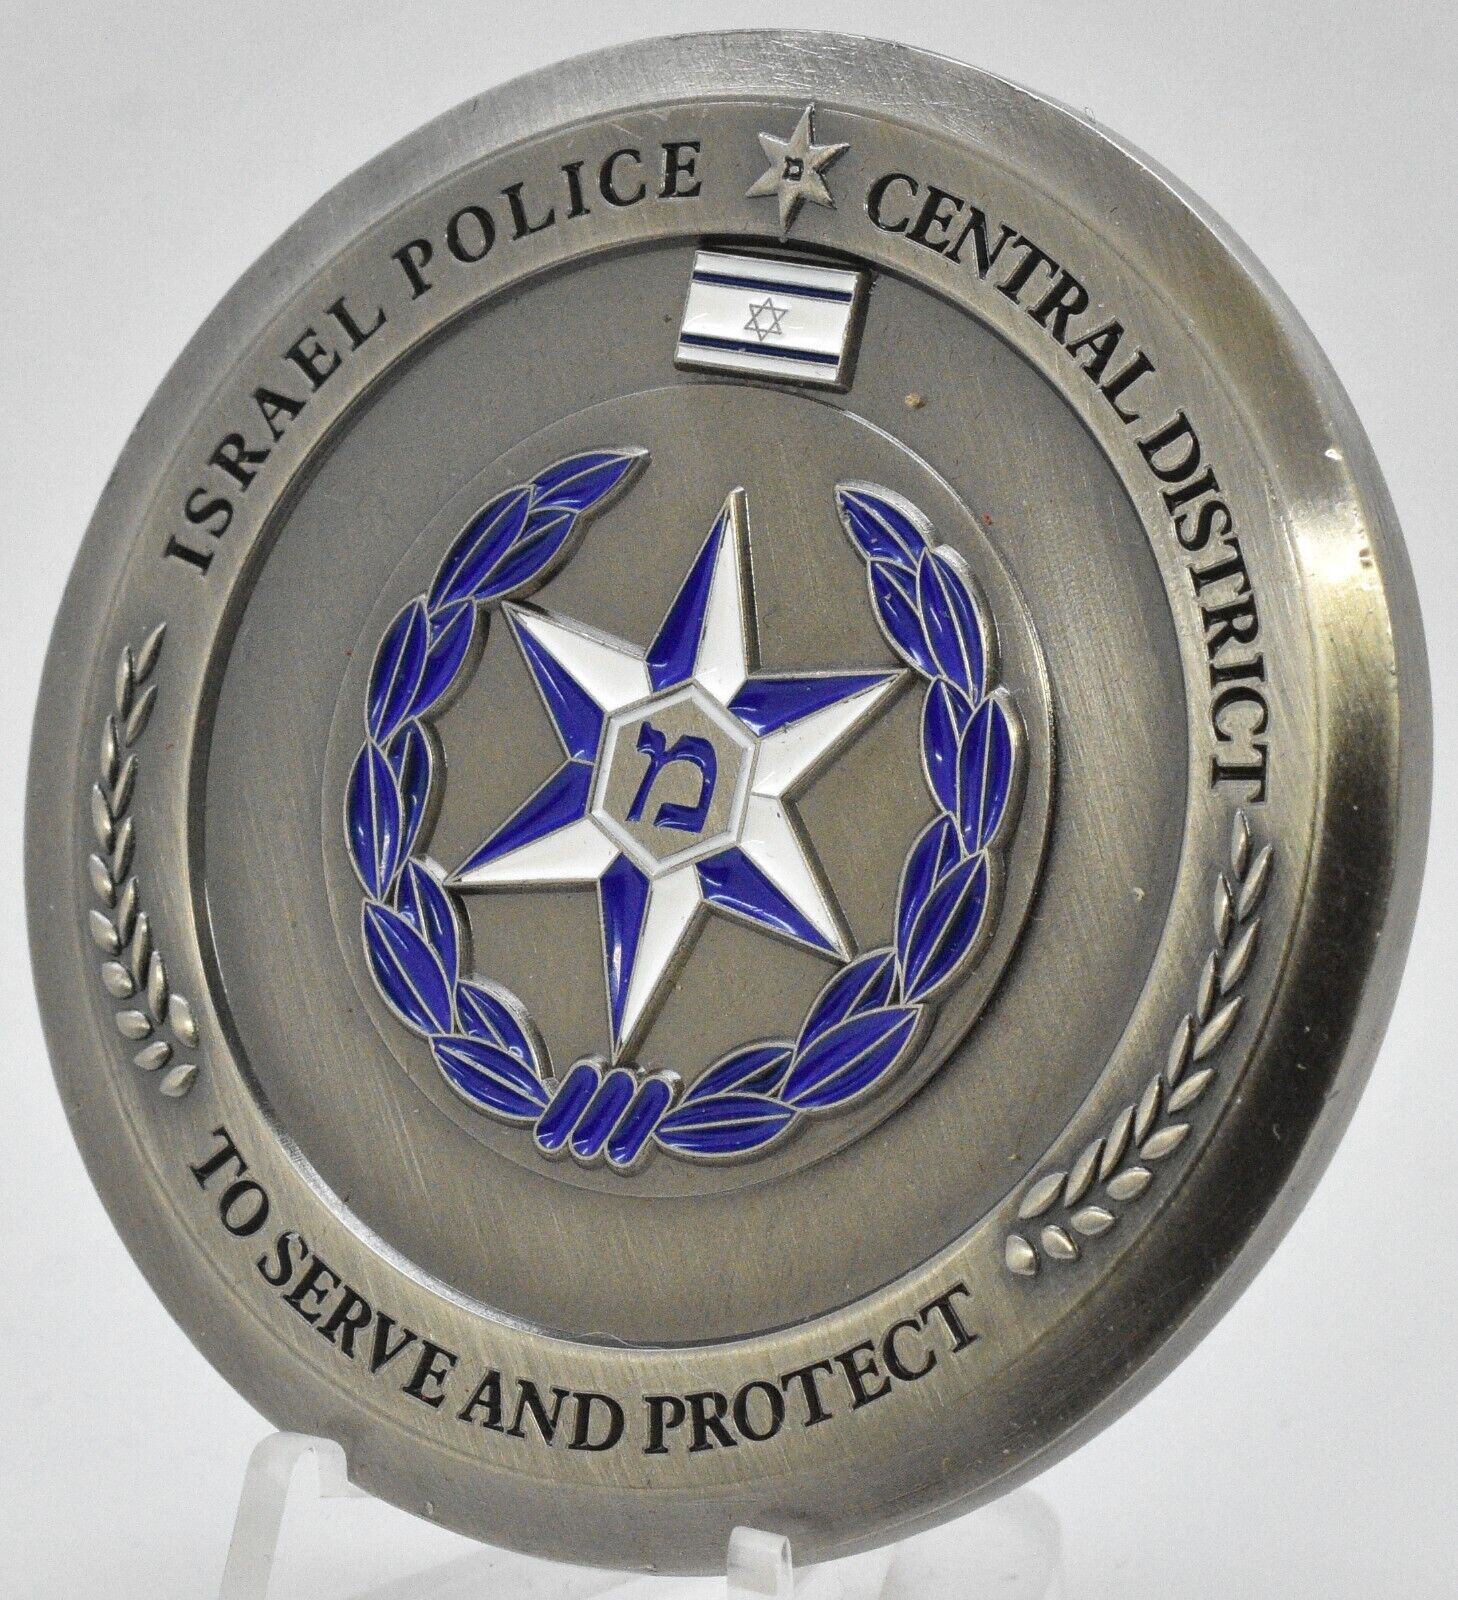 Israel Police Central District Medal Challenge Coin